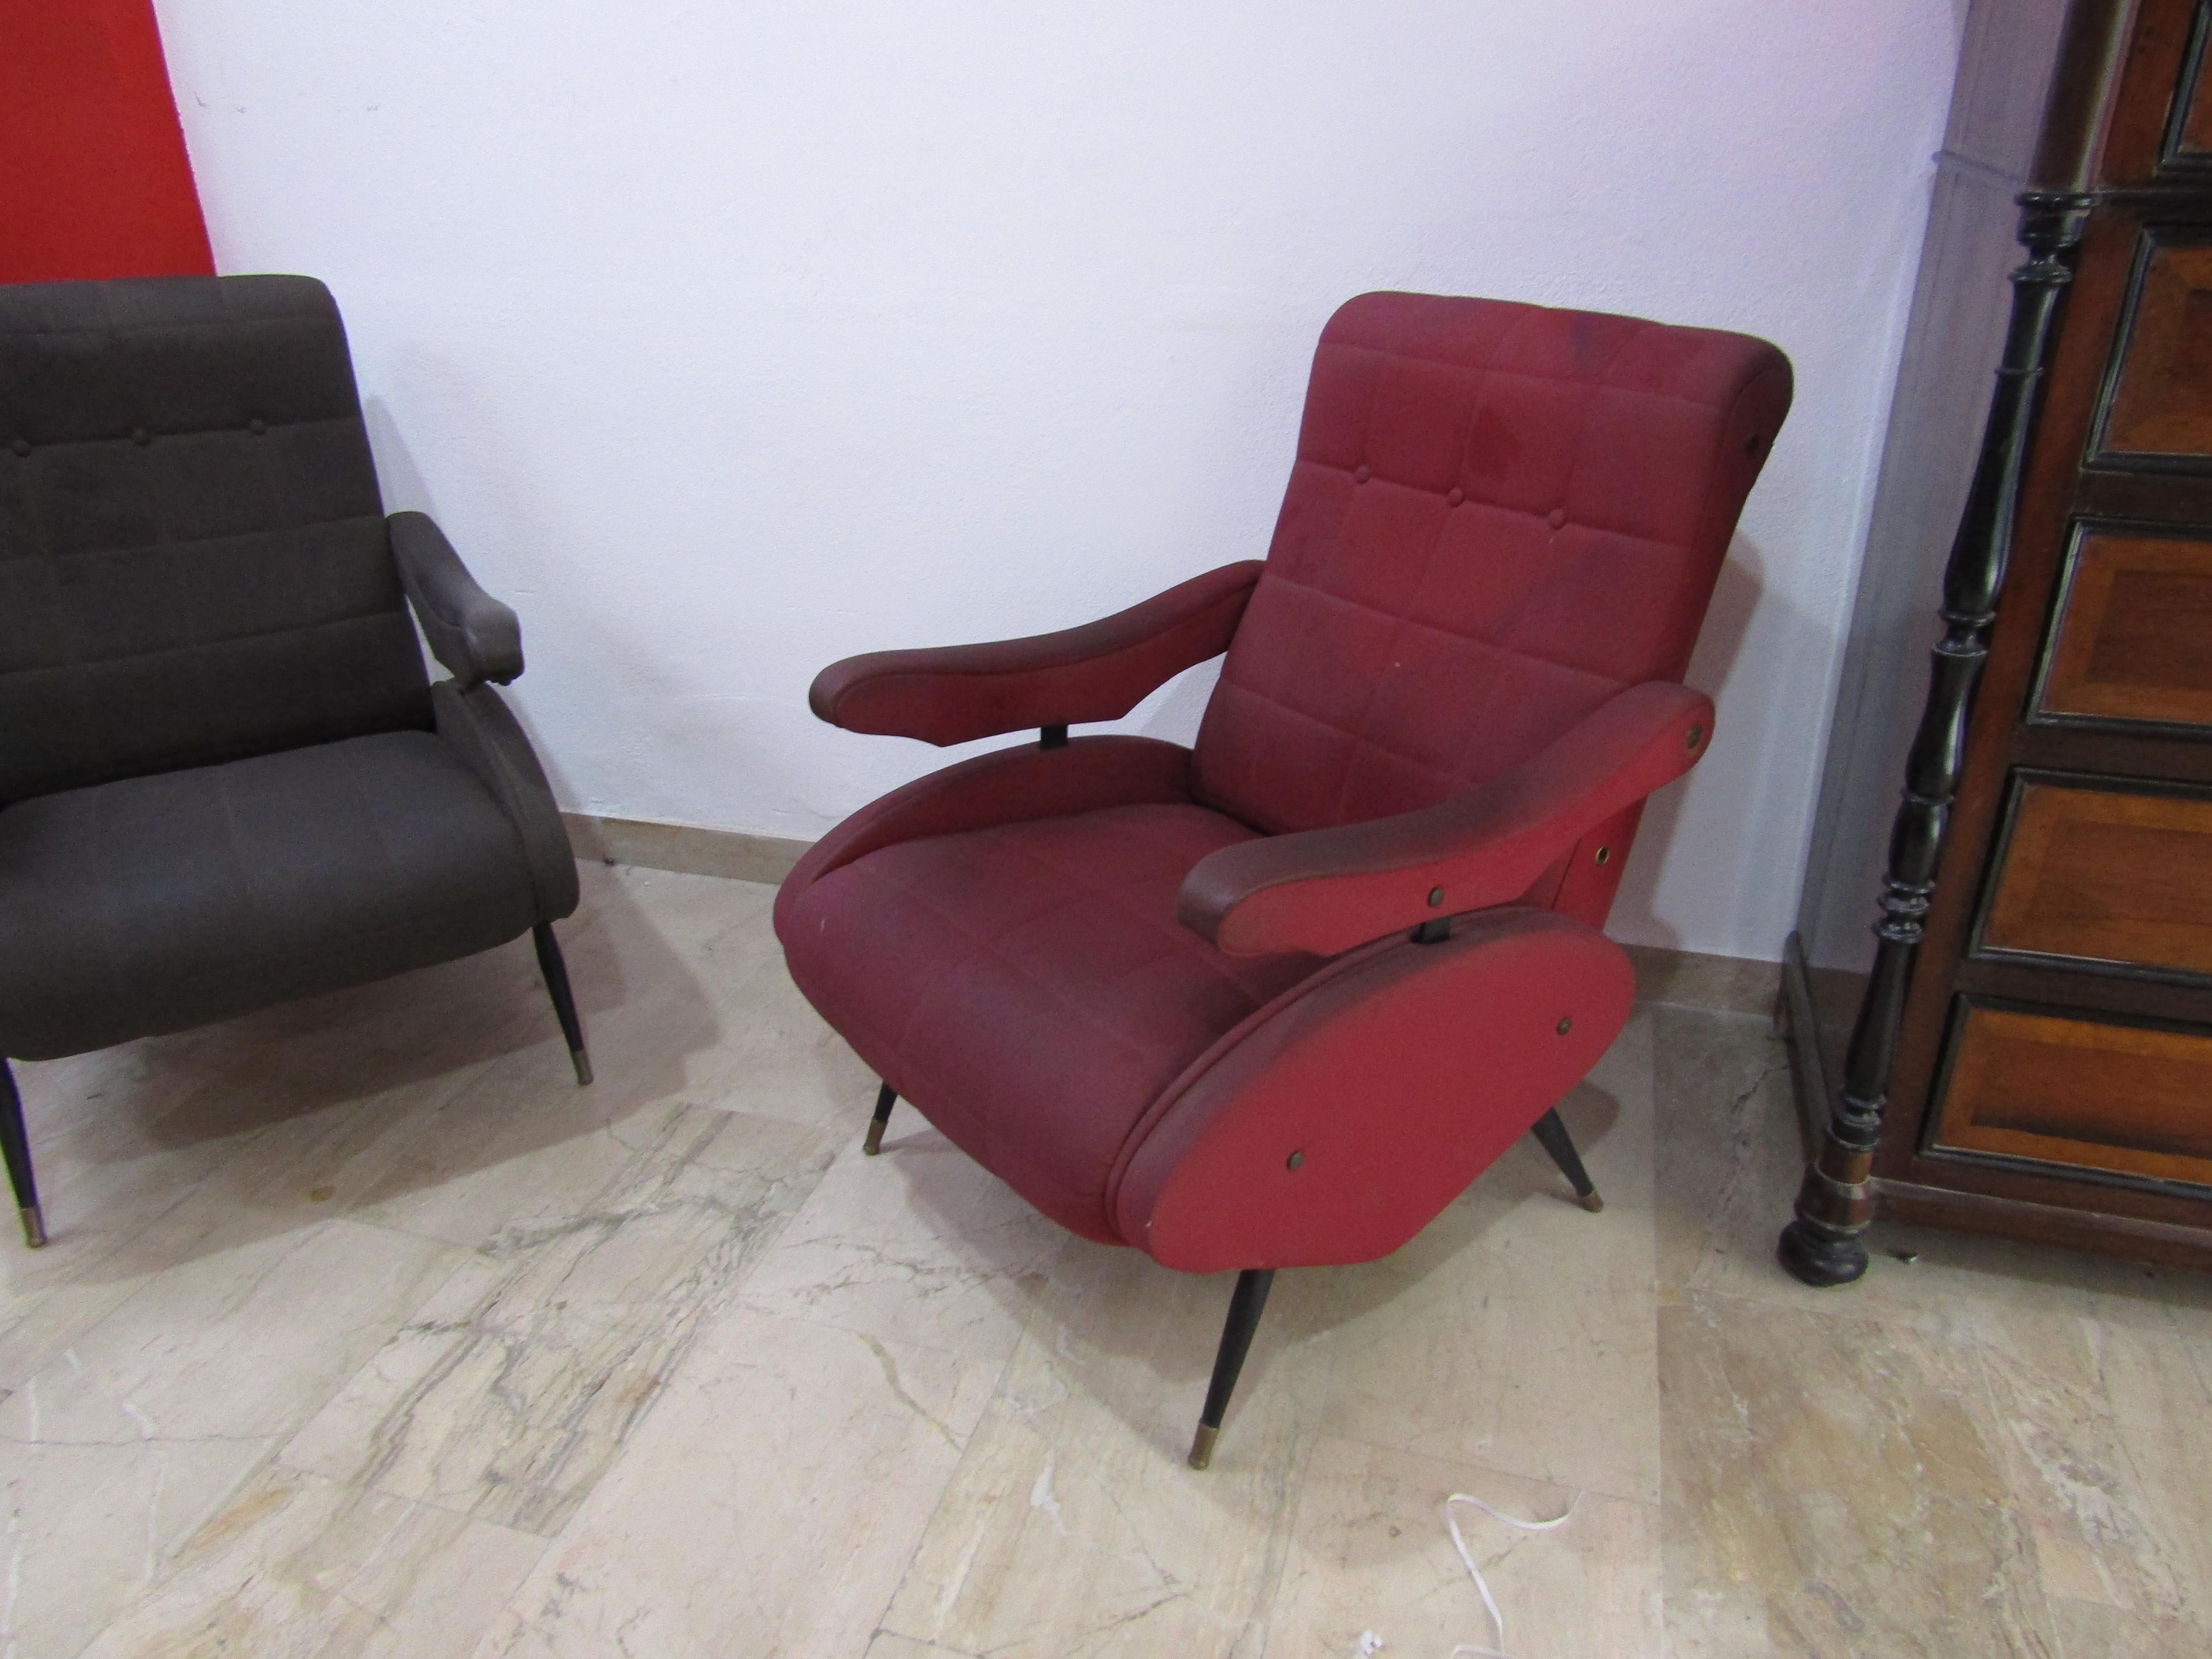 This pair of Oscar armchairs was produced by Novarredo in the 1970s and designed by Nello Pini in metal with black and red leatherette upholstery, the armchairs have small holes.